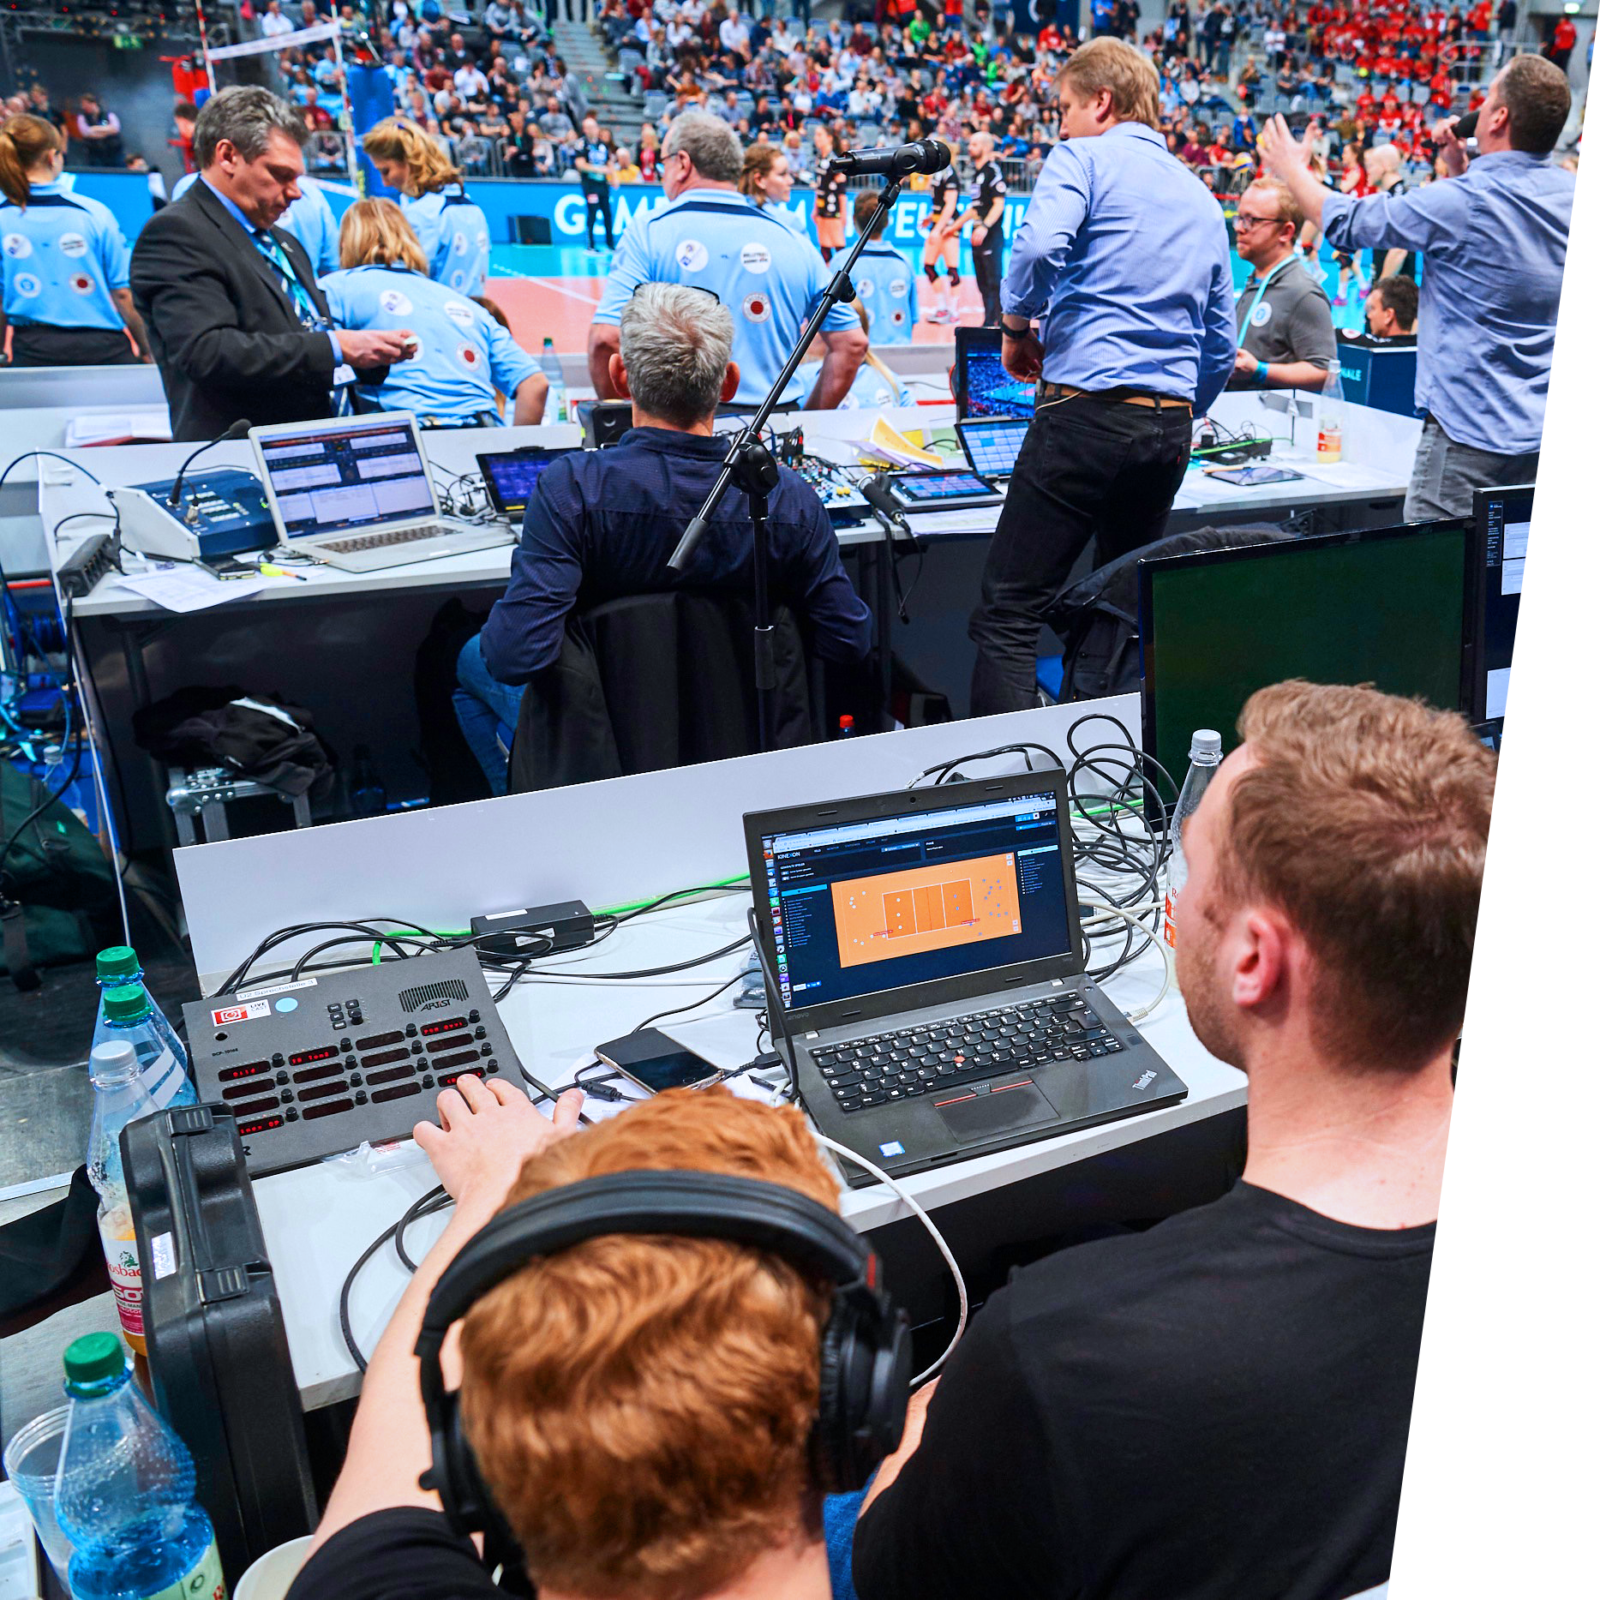 A sports data analyst sits courtside and provides stats to media members and scoreboard operators that they can share with fans in messages or social media posts.